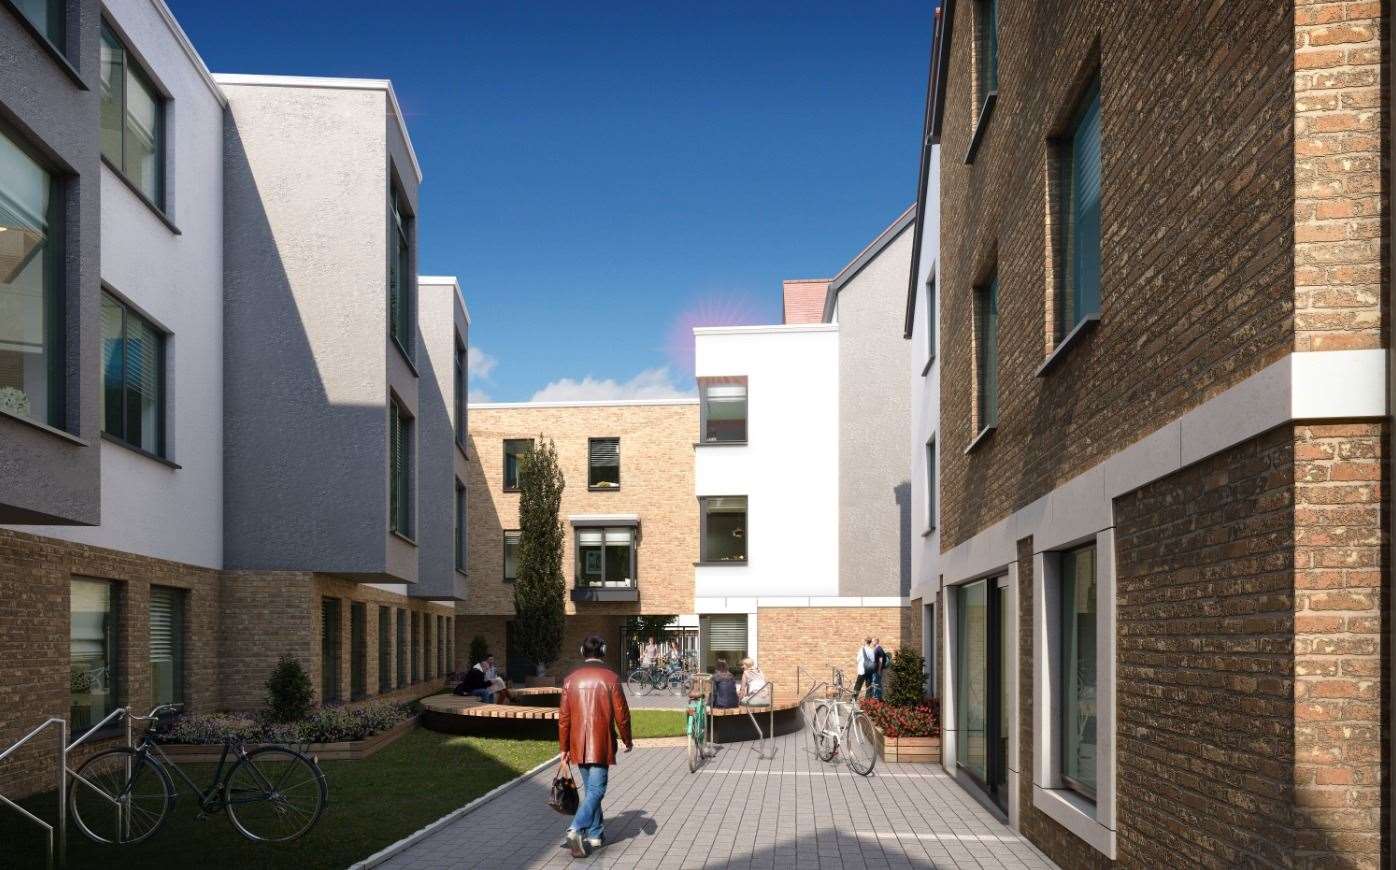 Students will have to fork out more than £900 a month for studio flats at the new Westgate One development in Canterbury. Picture: Paul Roberts Developments